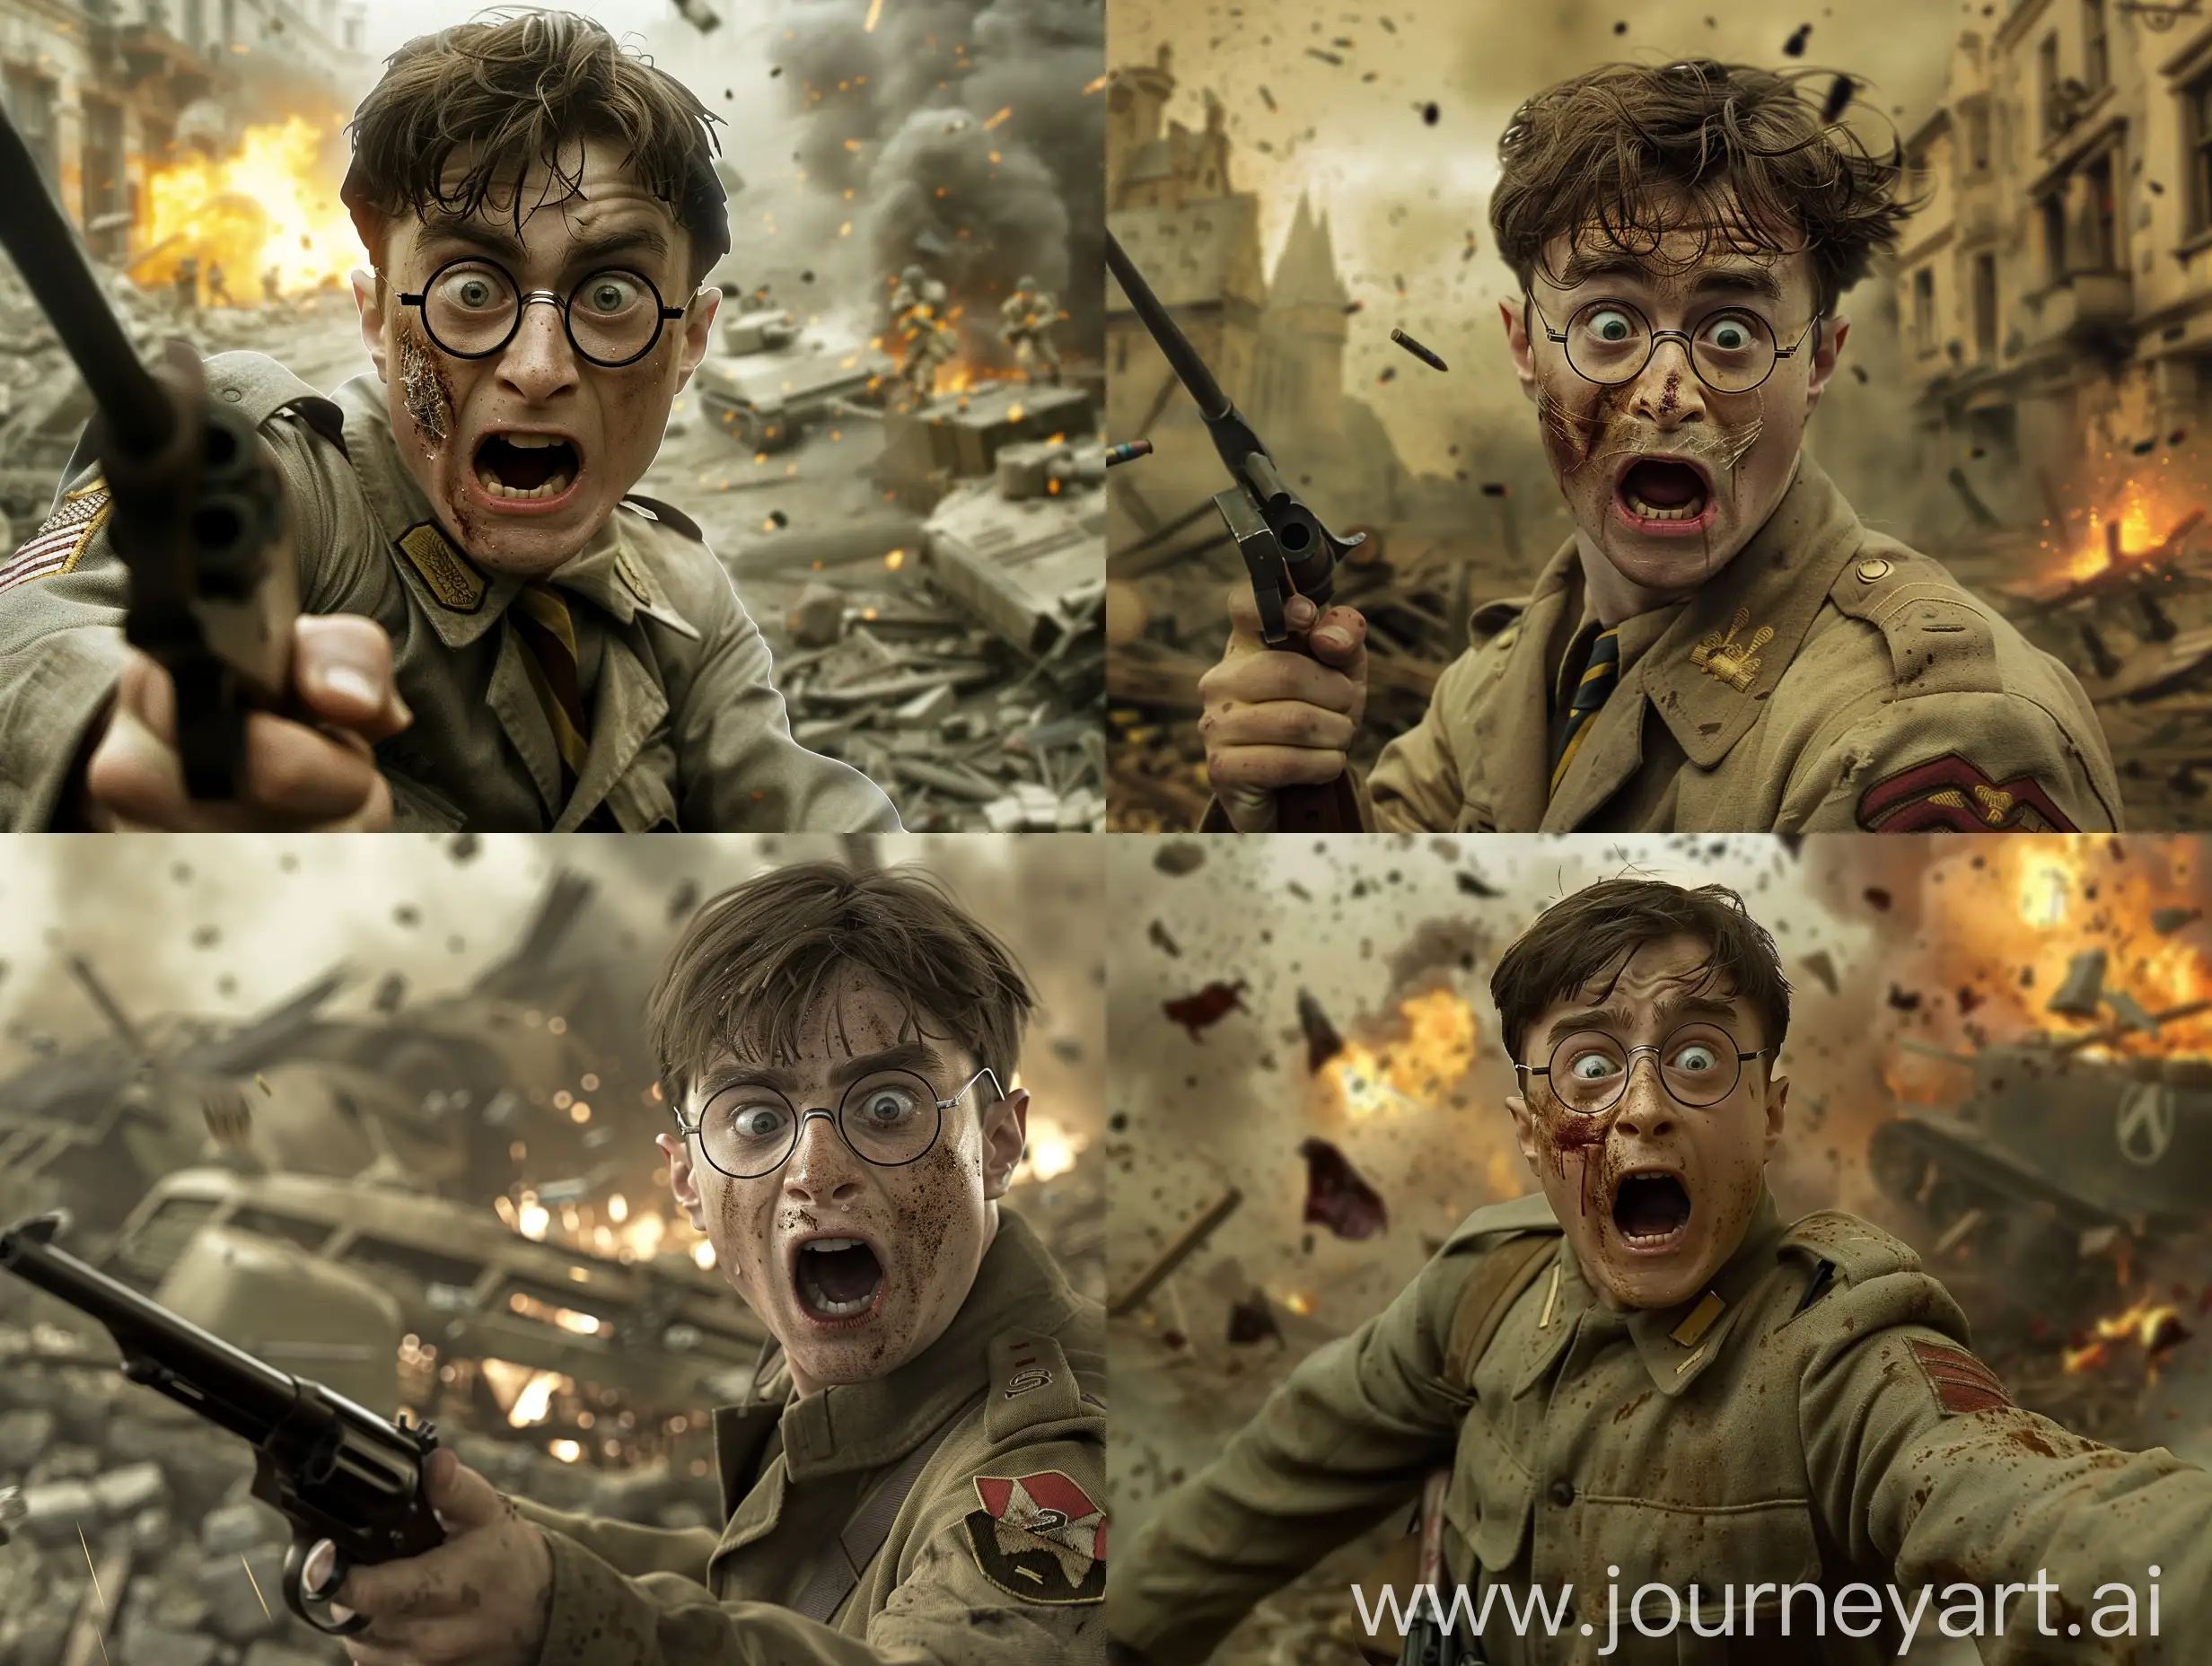 Harry-Potter-Shocked-in-WWII-US-Army-Uniform-Amid-Destruction